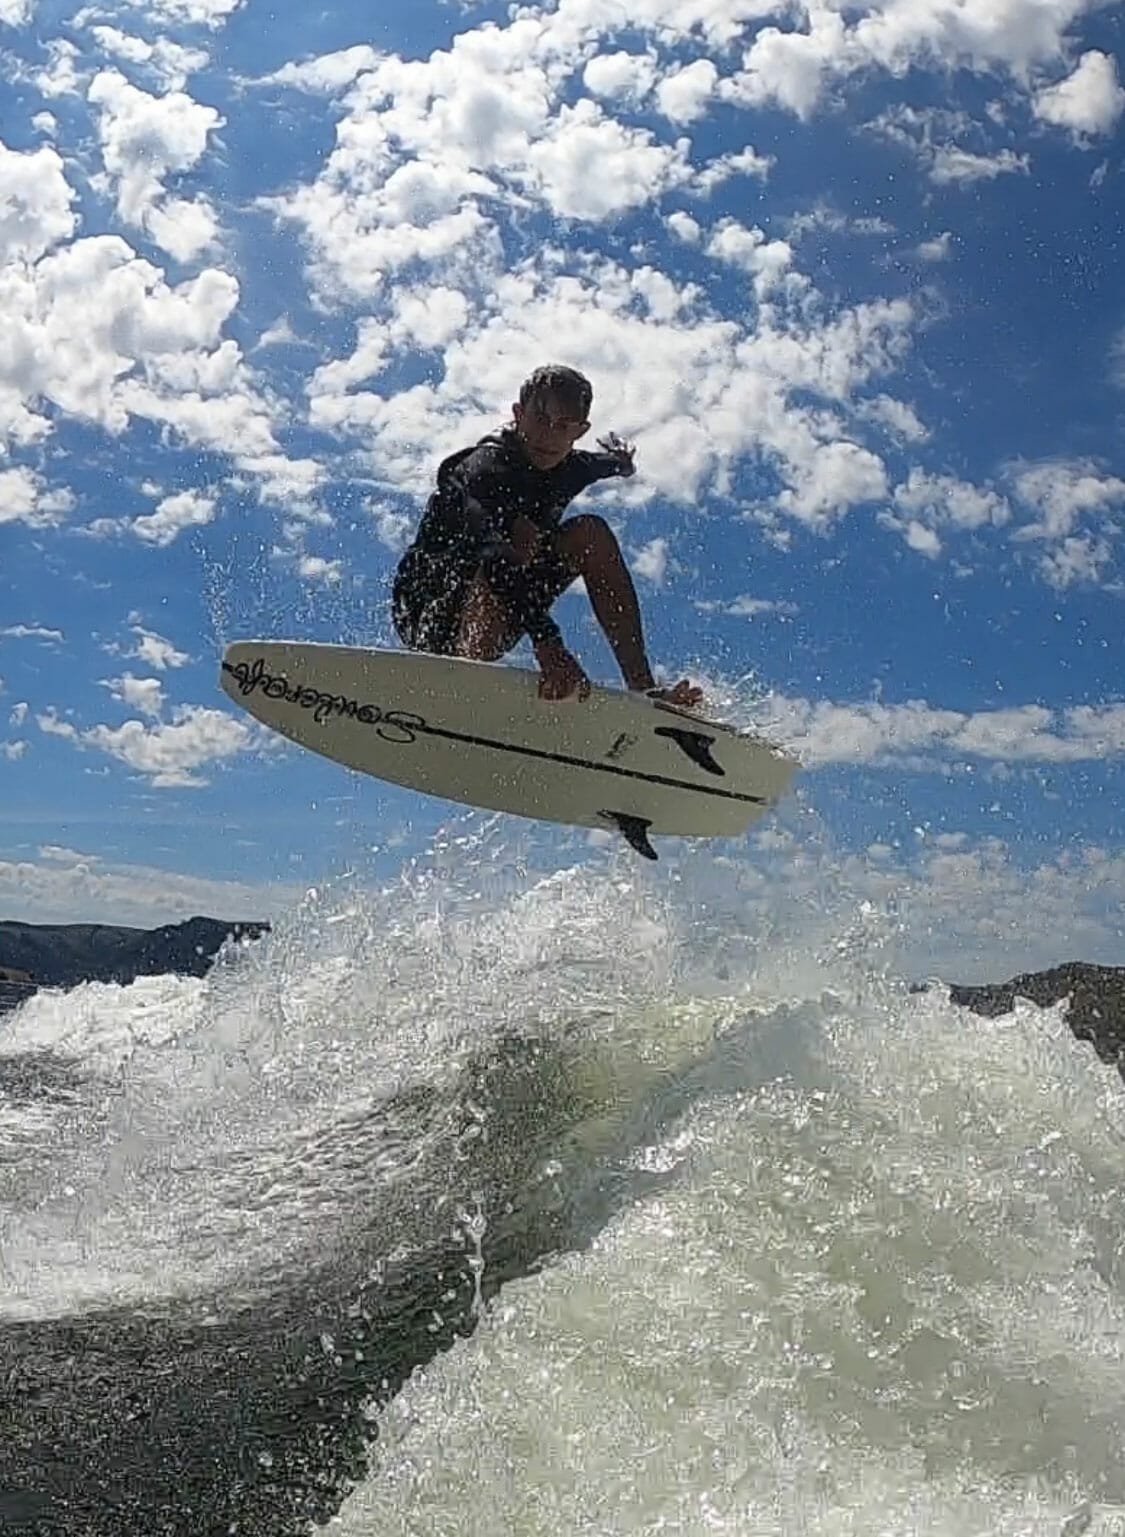 A man riding a wakesurf board in the air behind a wakeboat.